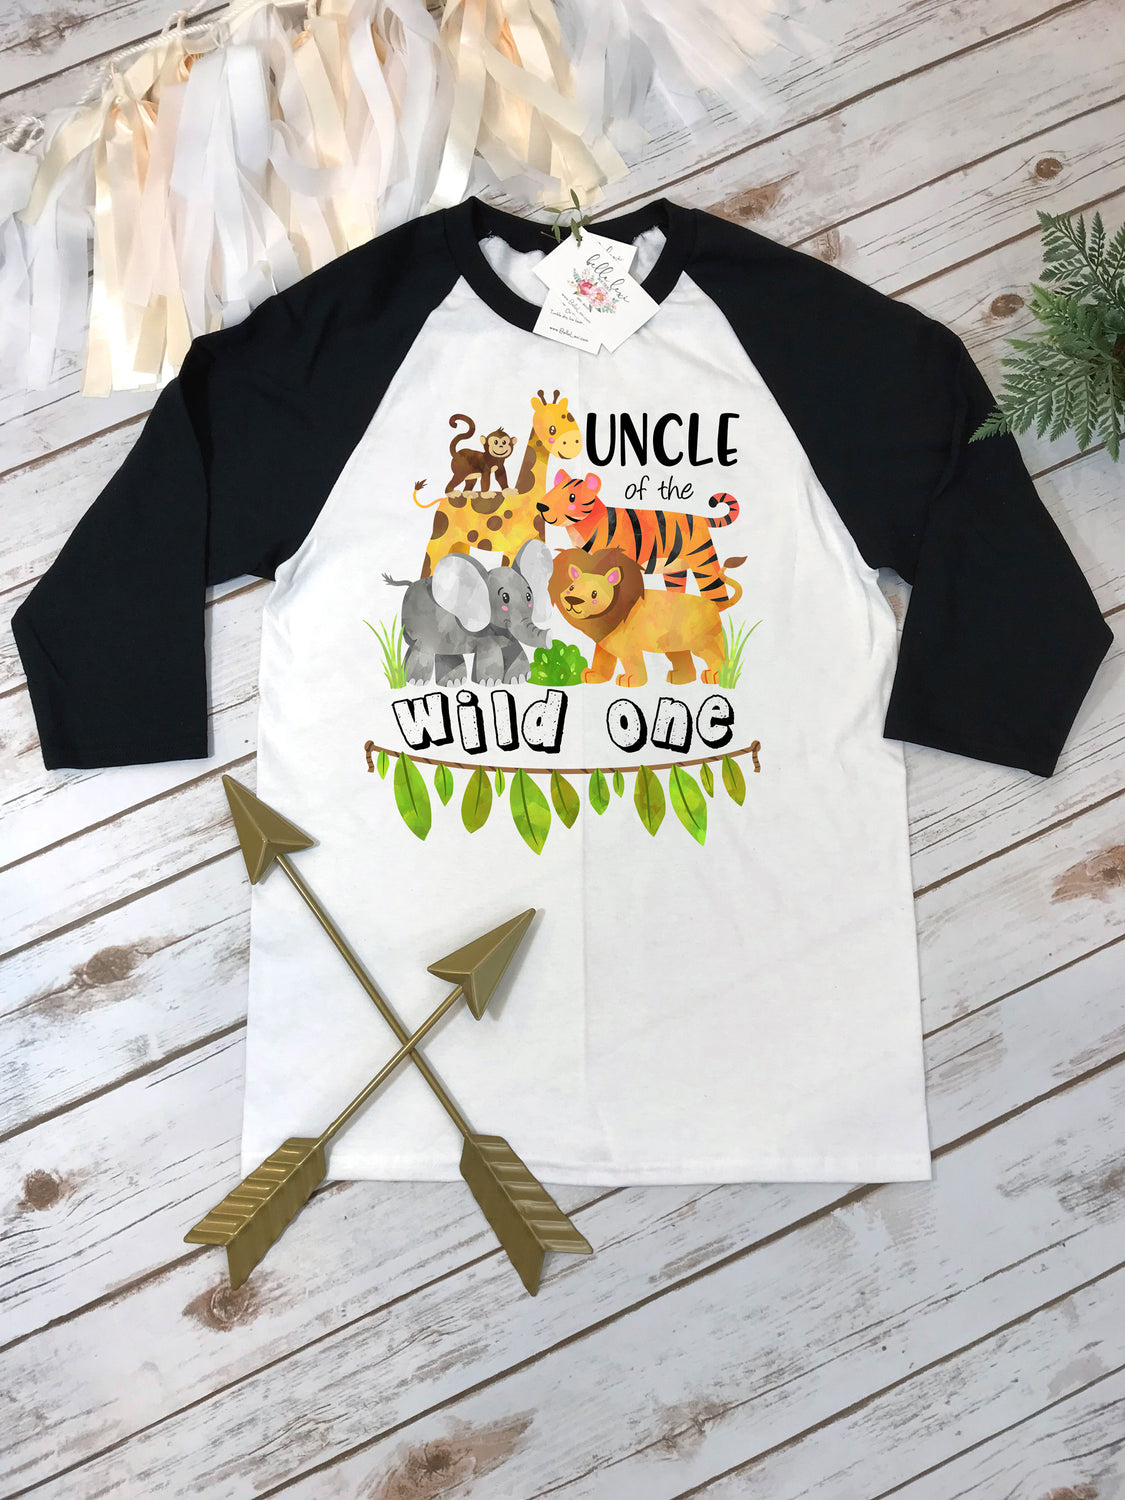 Uncle of the Wild One, Wild One Party, Jungle Birthday, Safari Birthday